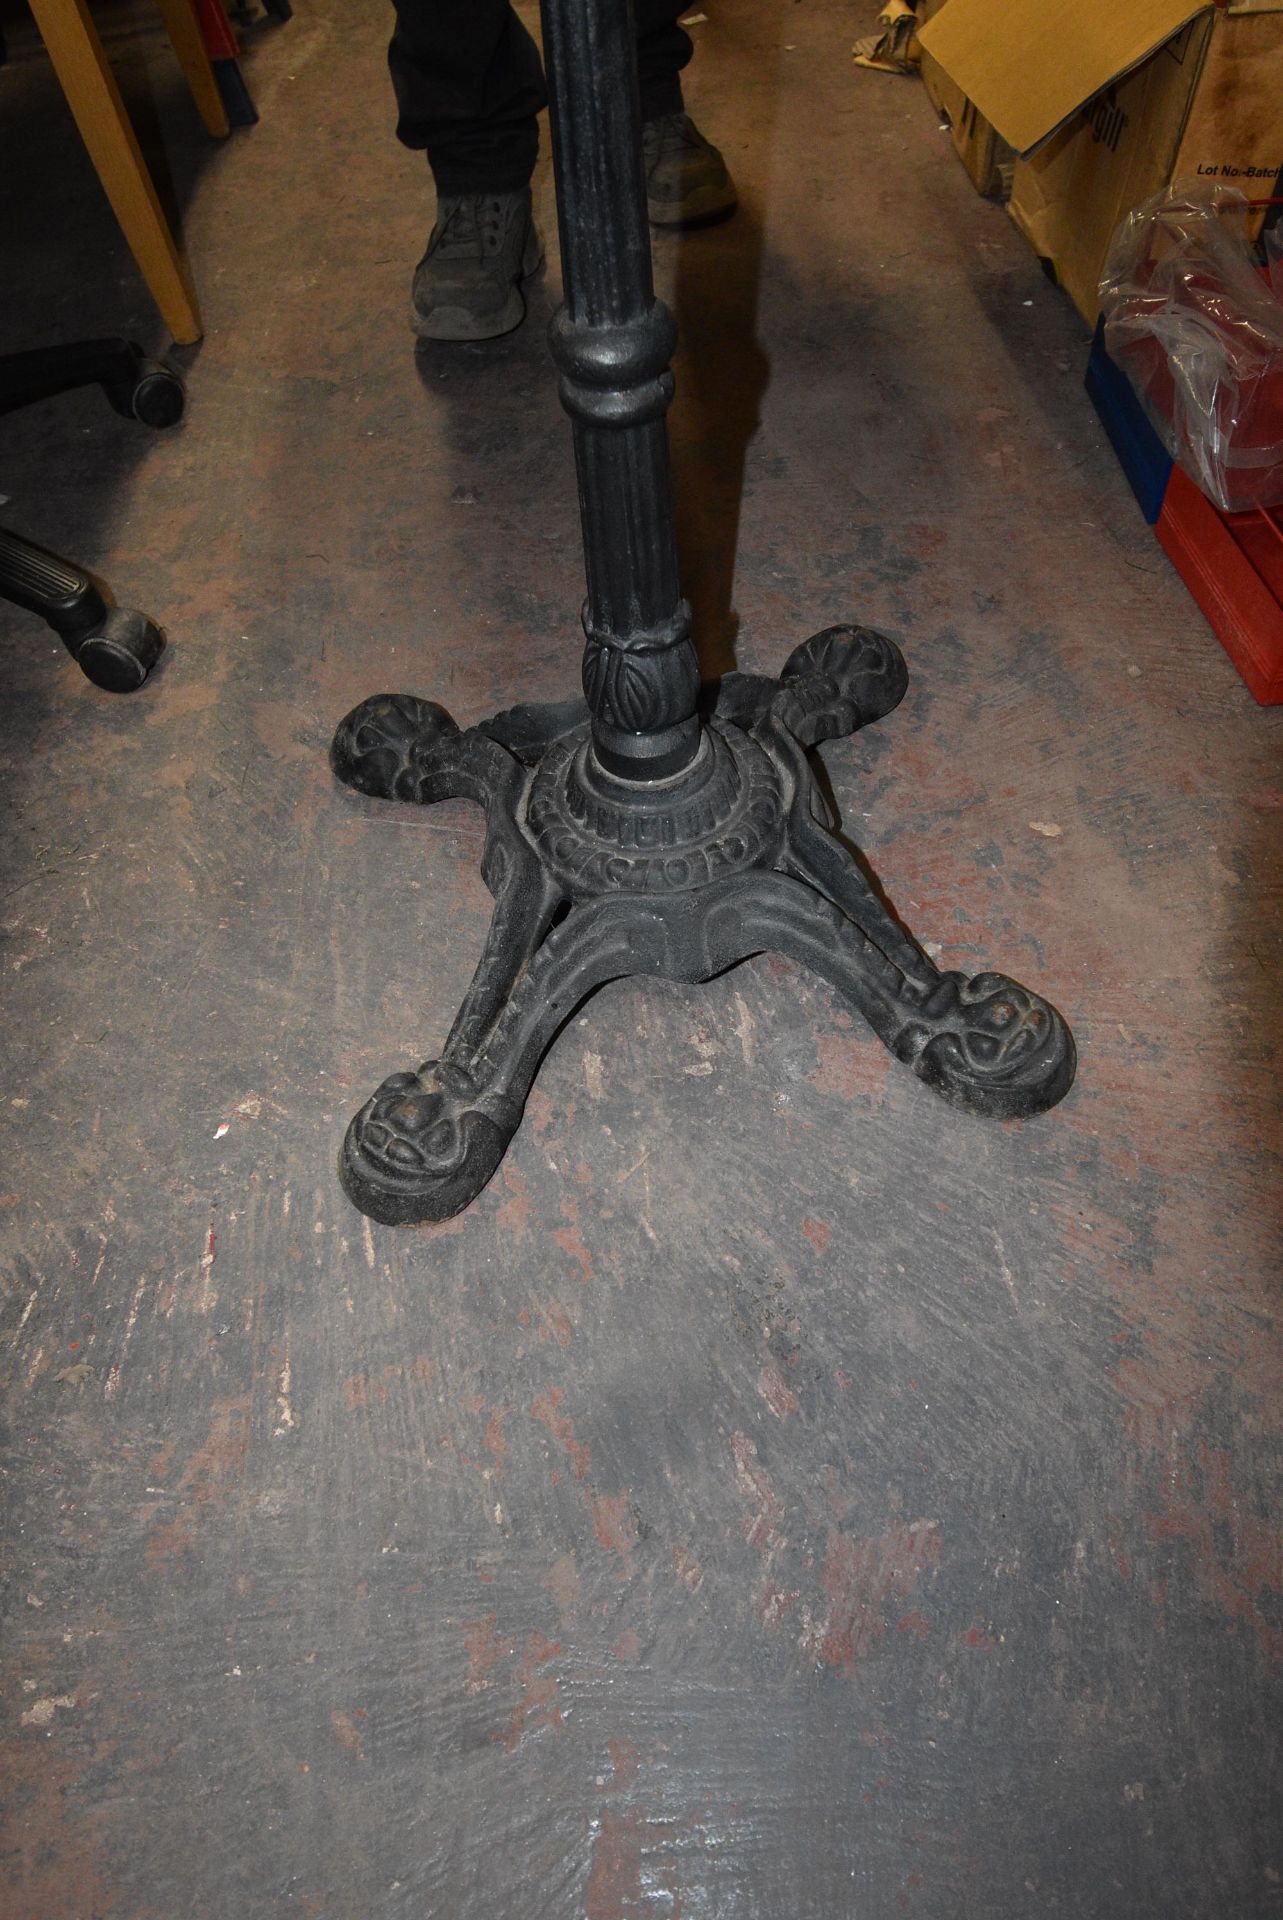 60cm Square Table with Cast Iron Pedestal - Image 2 of 2